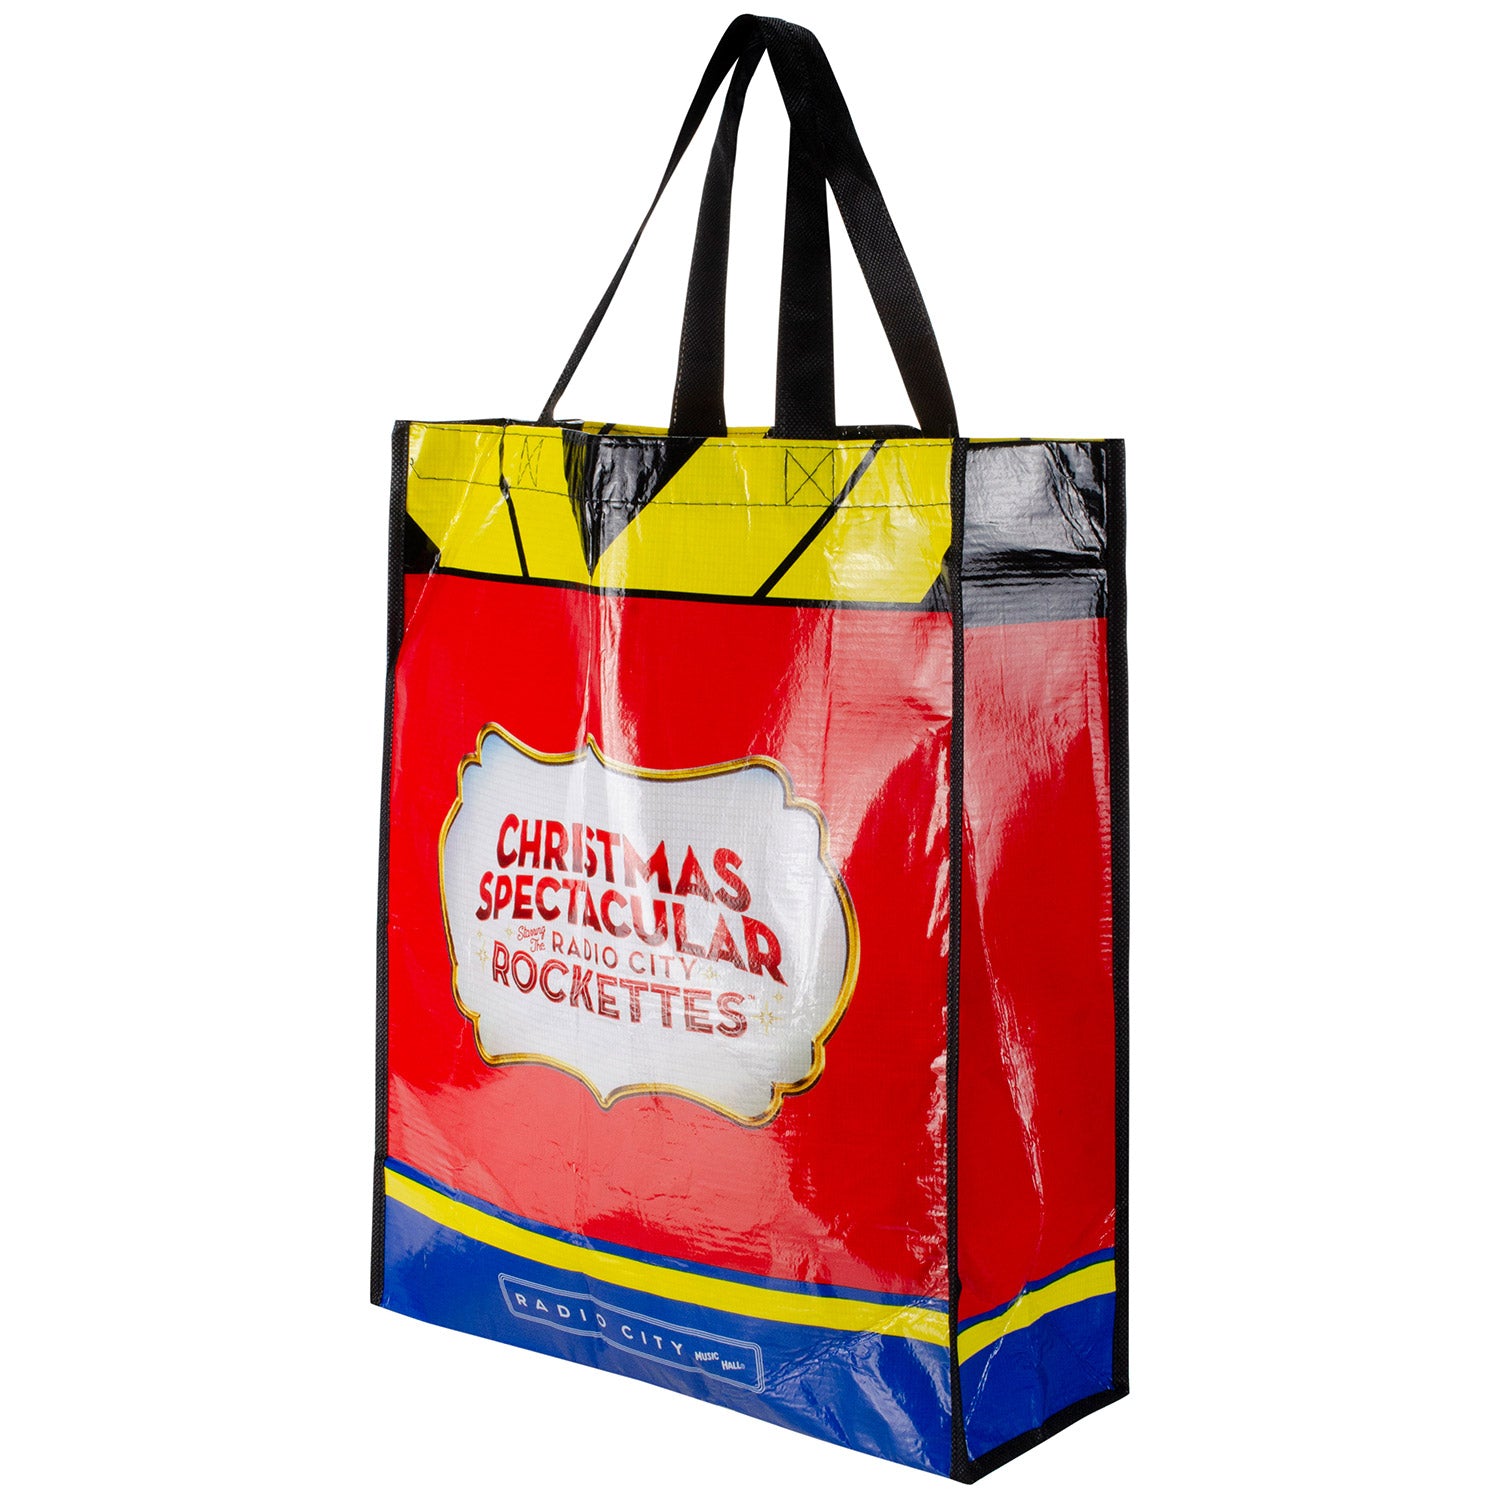 Christmas Spectacular Tote Bag In Red, Yellow, Blue & Black - Side View 1